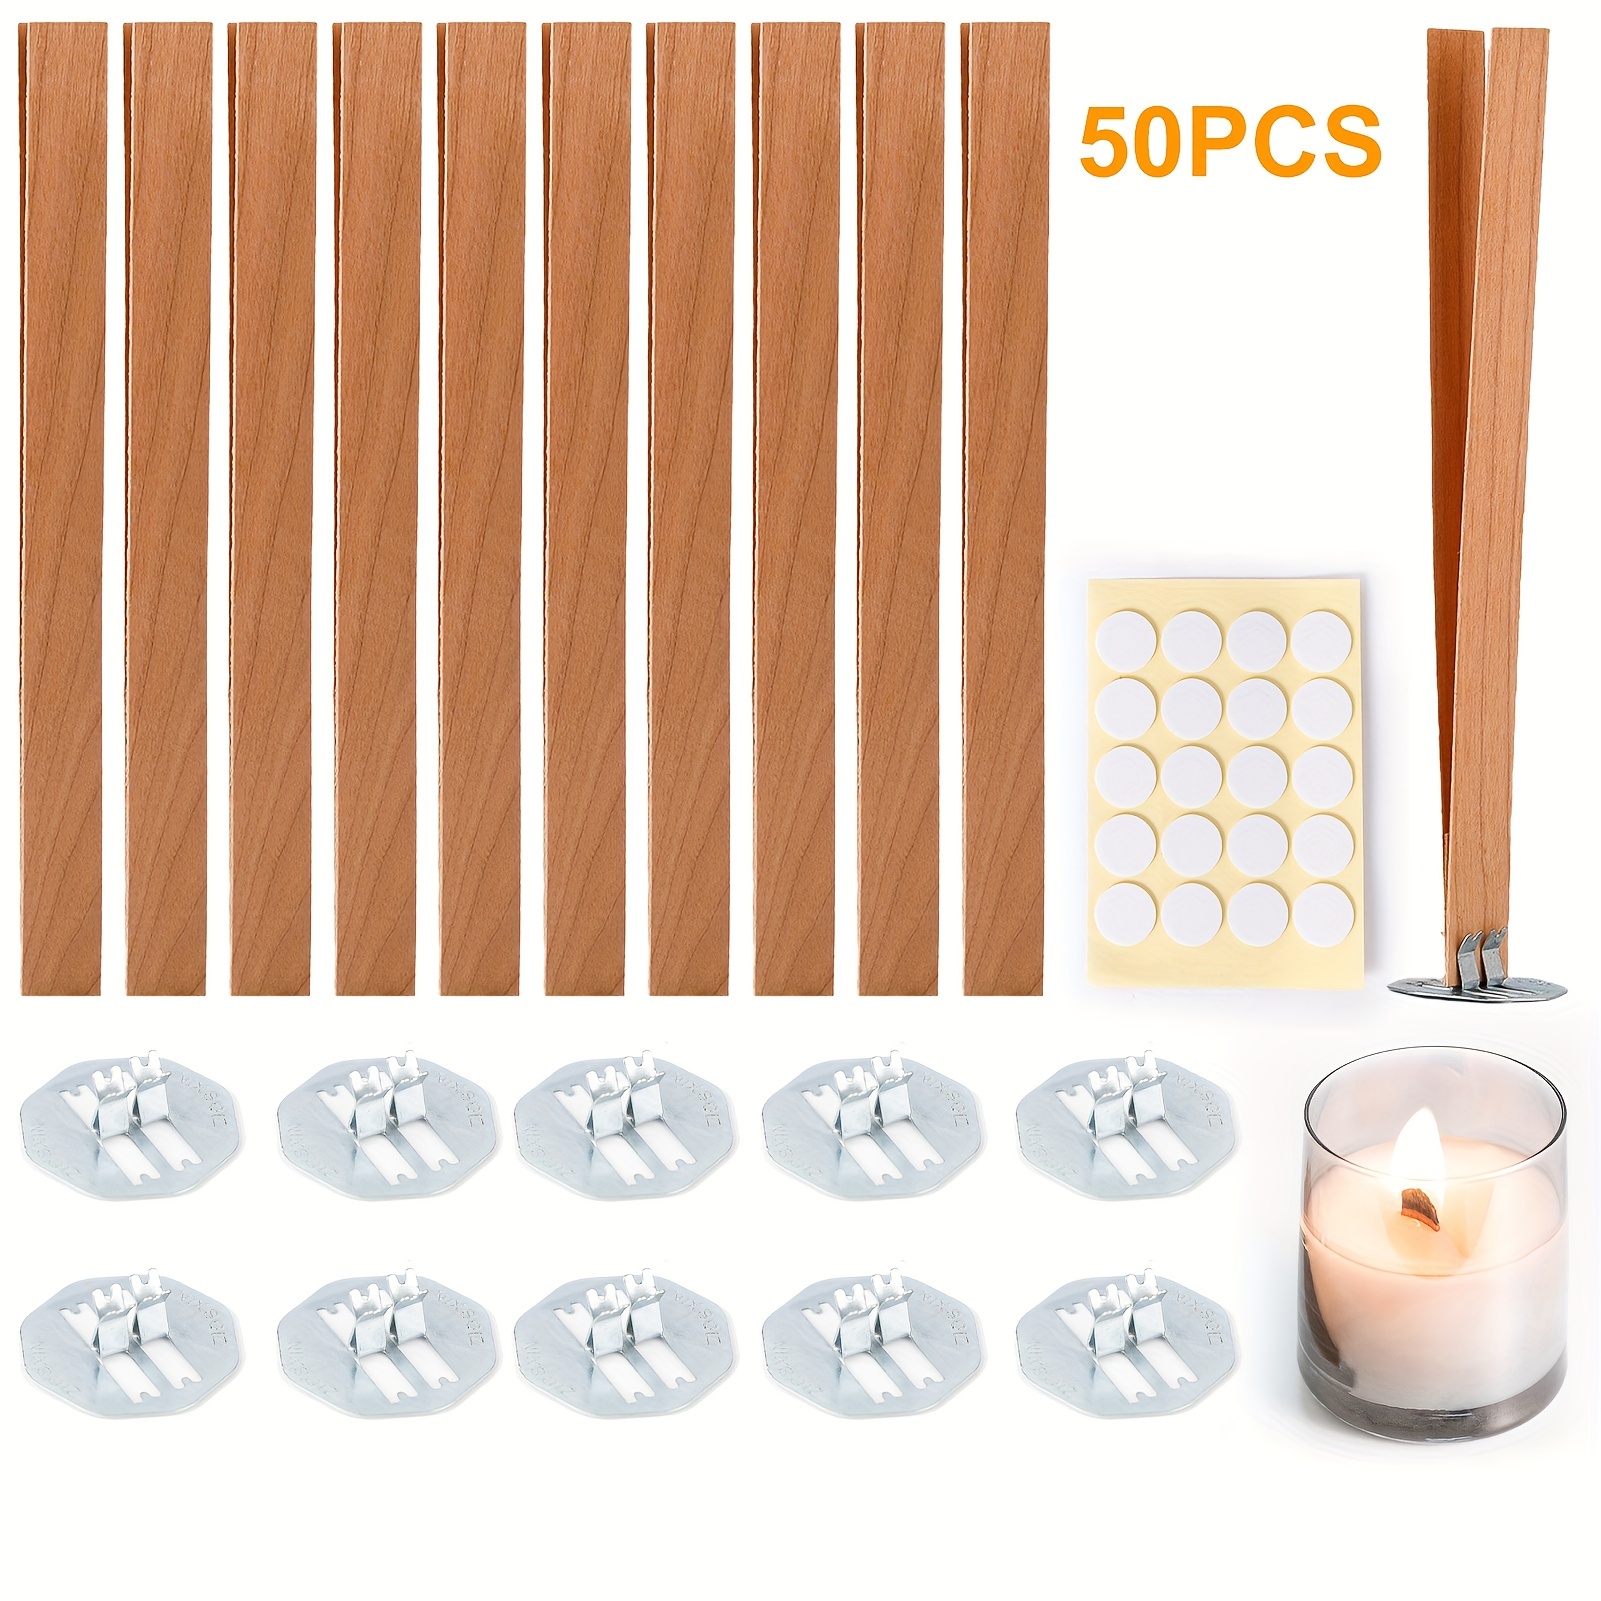 Natural Wooden Candle Wicks Wood Wicks For Candles Making - Temu